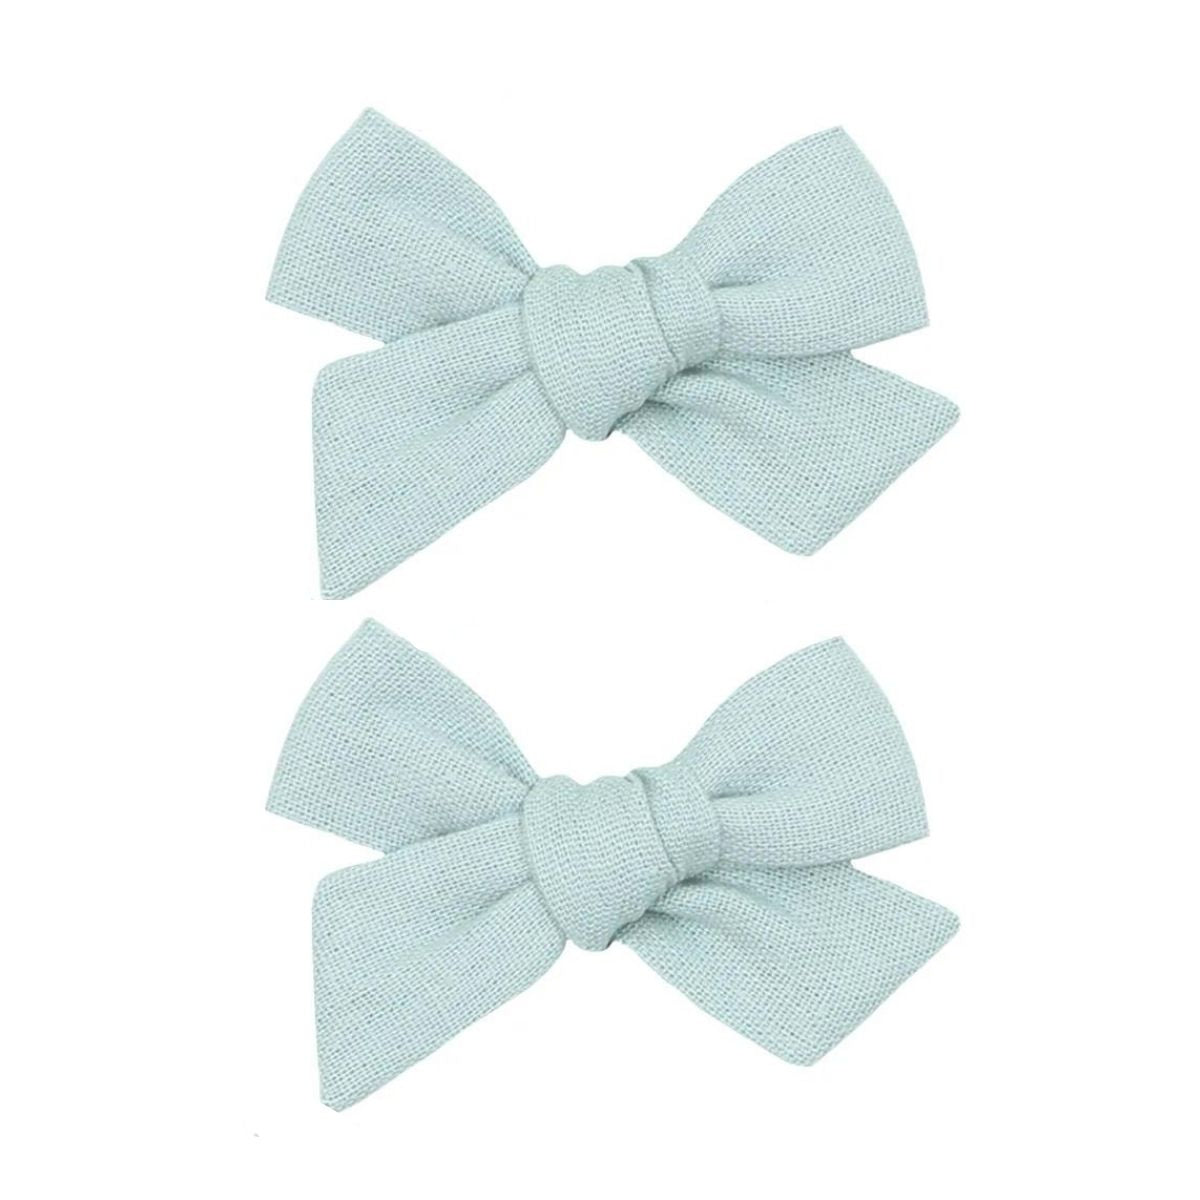 Lou Lou and Company Linen Bow Clip - Pigtail Set - Small - Mist